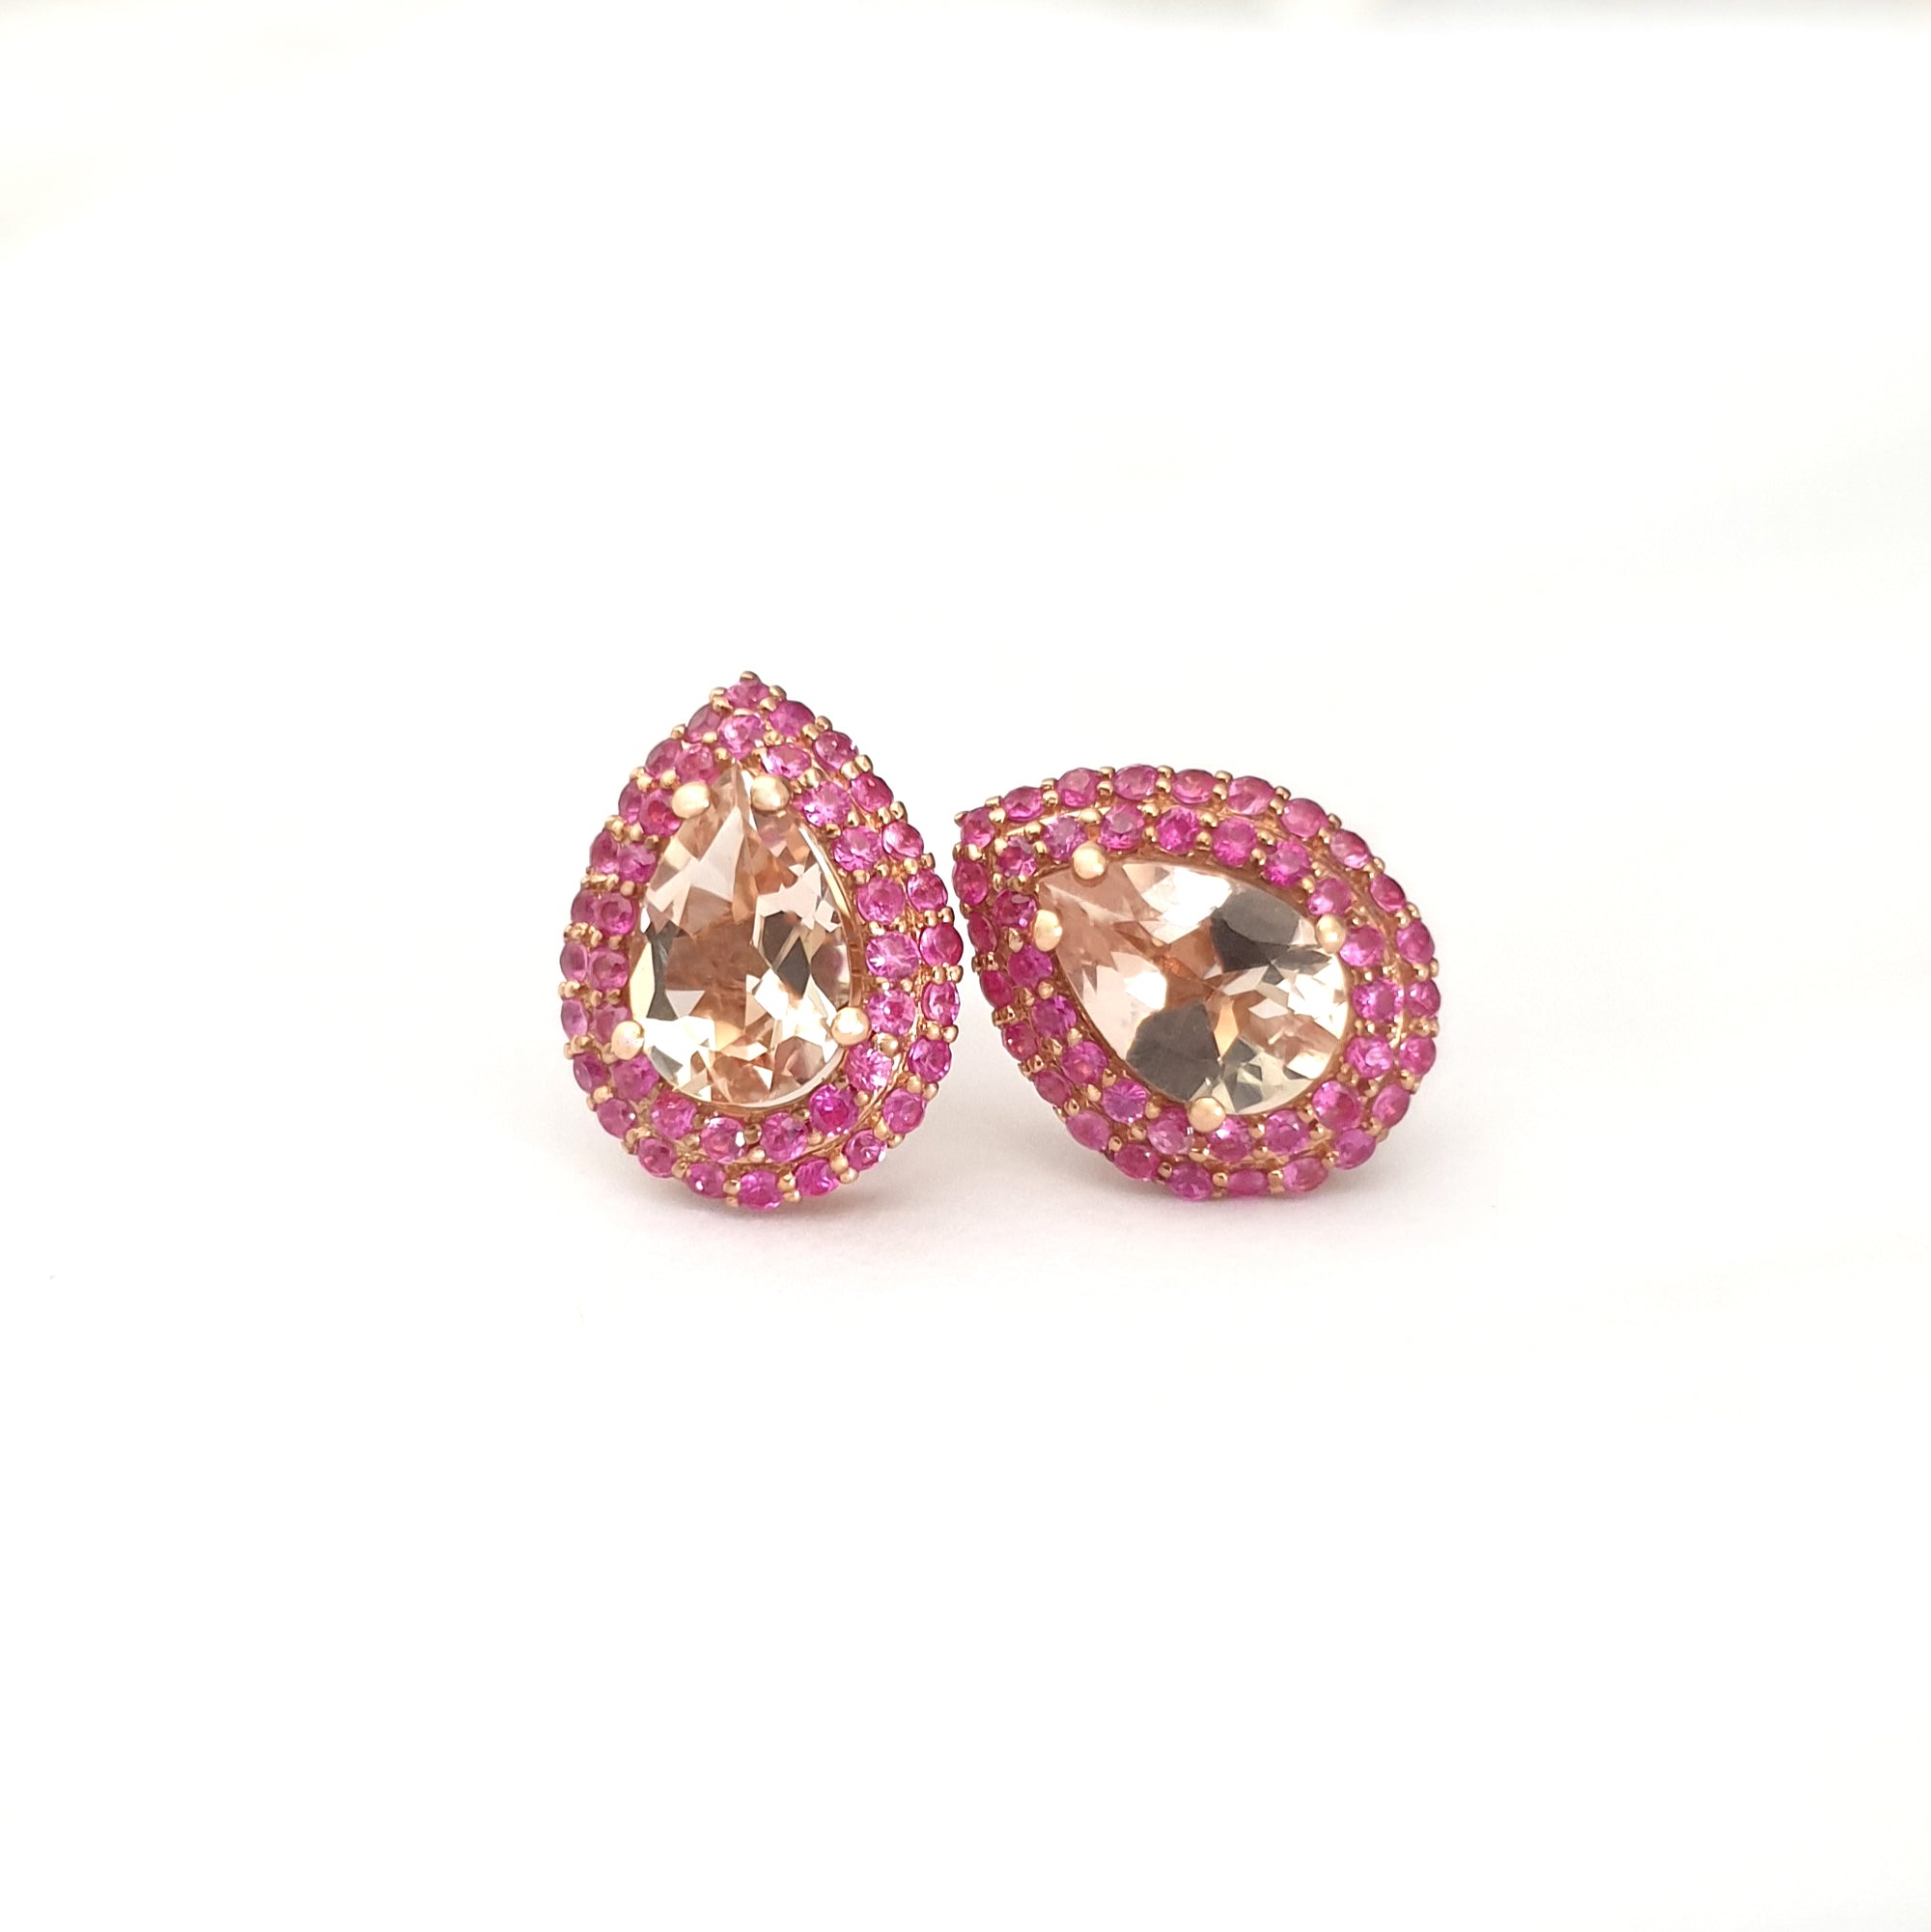 Show Stopping Morganite and Double Pink Sapphire Halo Stud Earrings